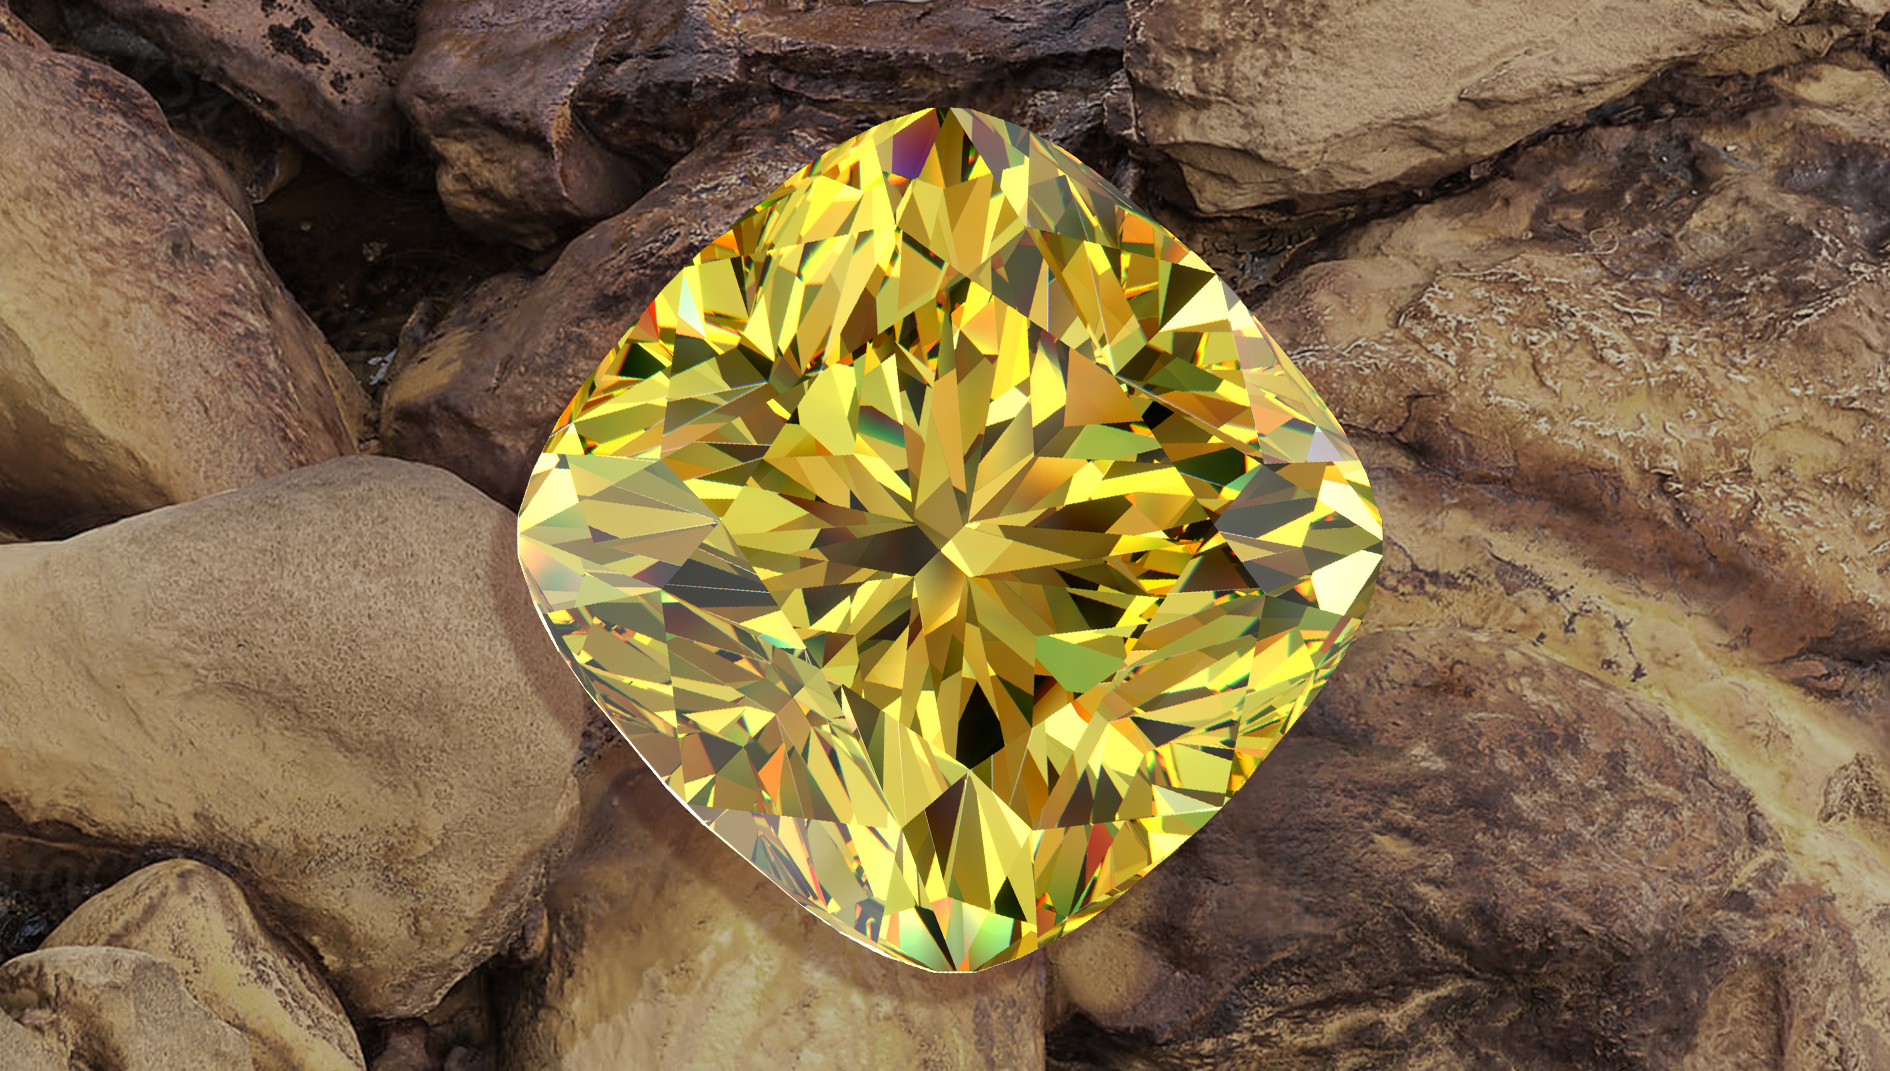 Colored diamonds Wiki: The great mystery of natural colored diamonds  simplified